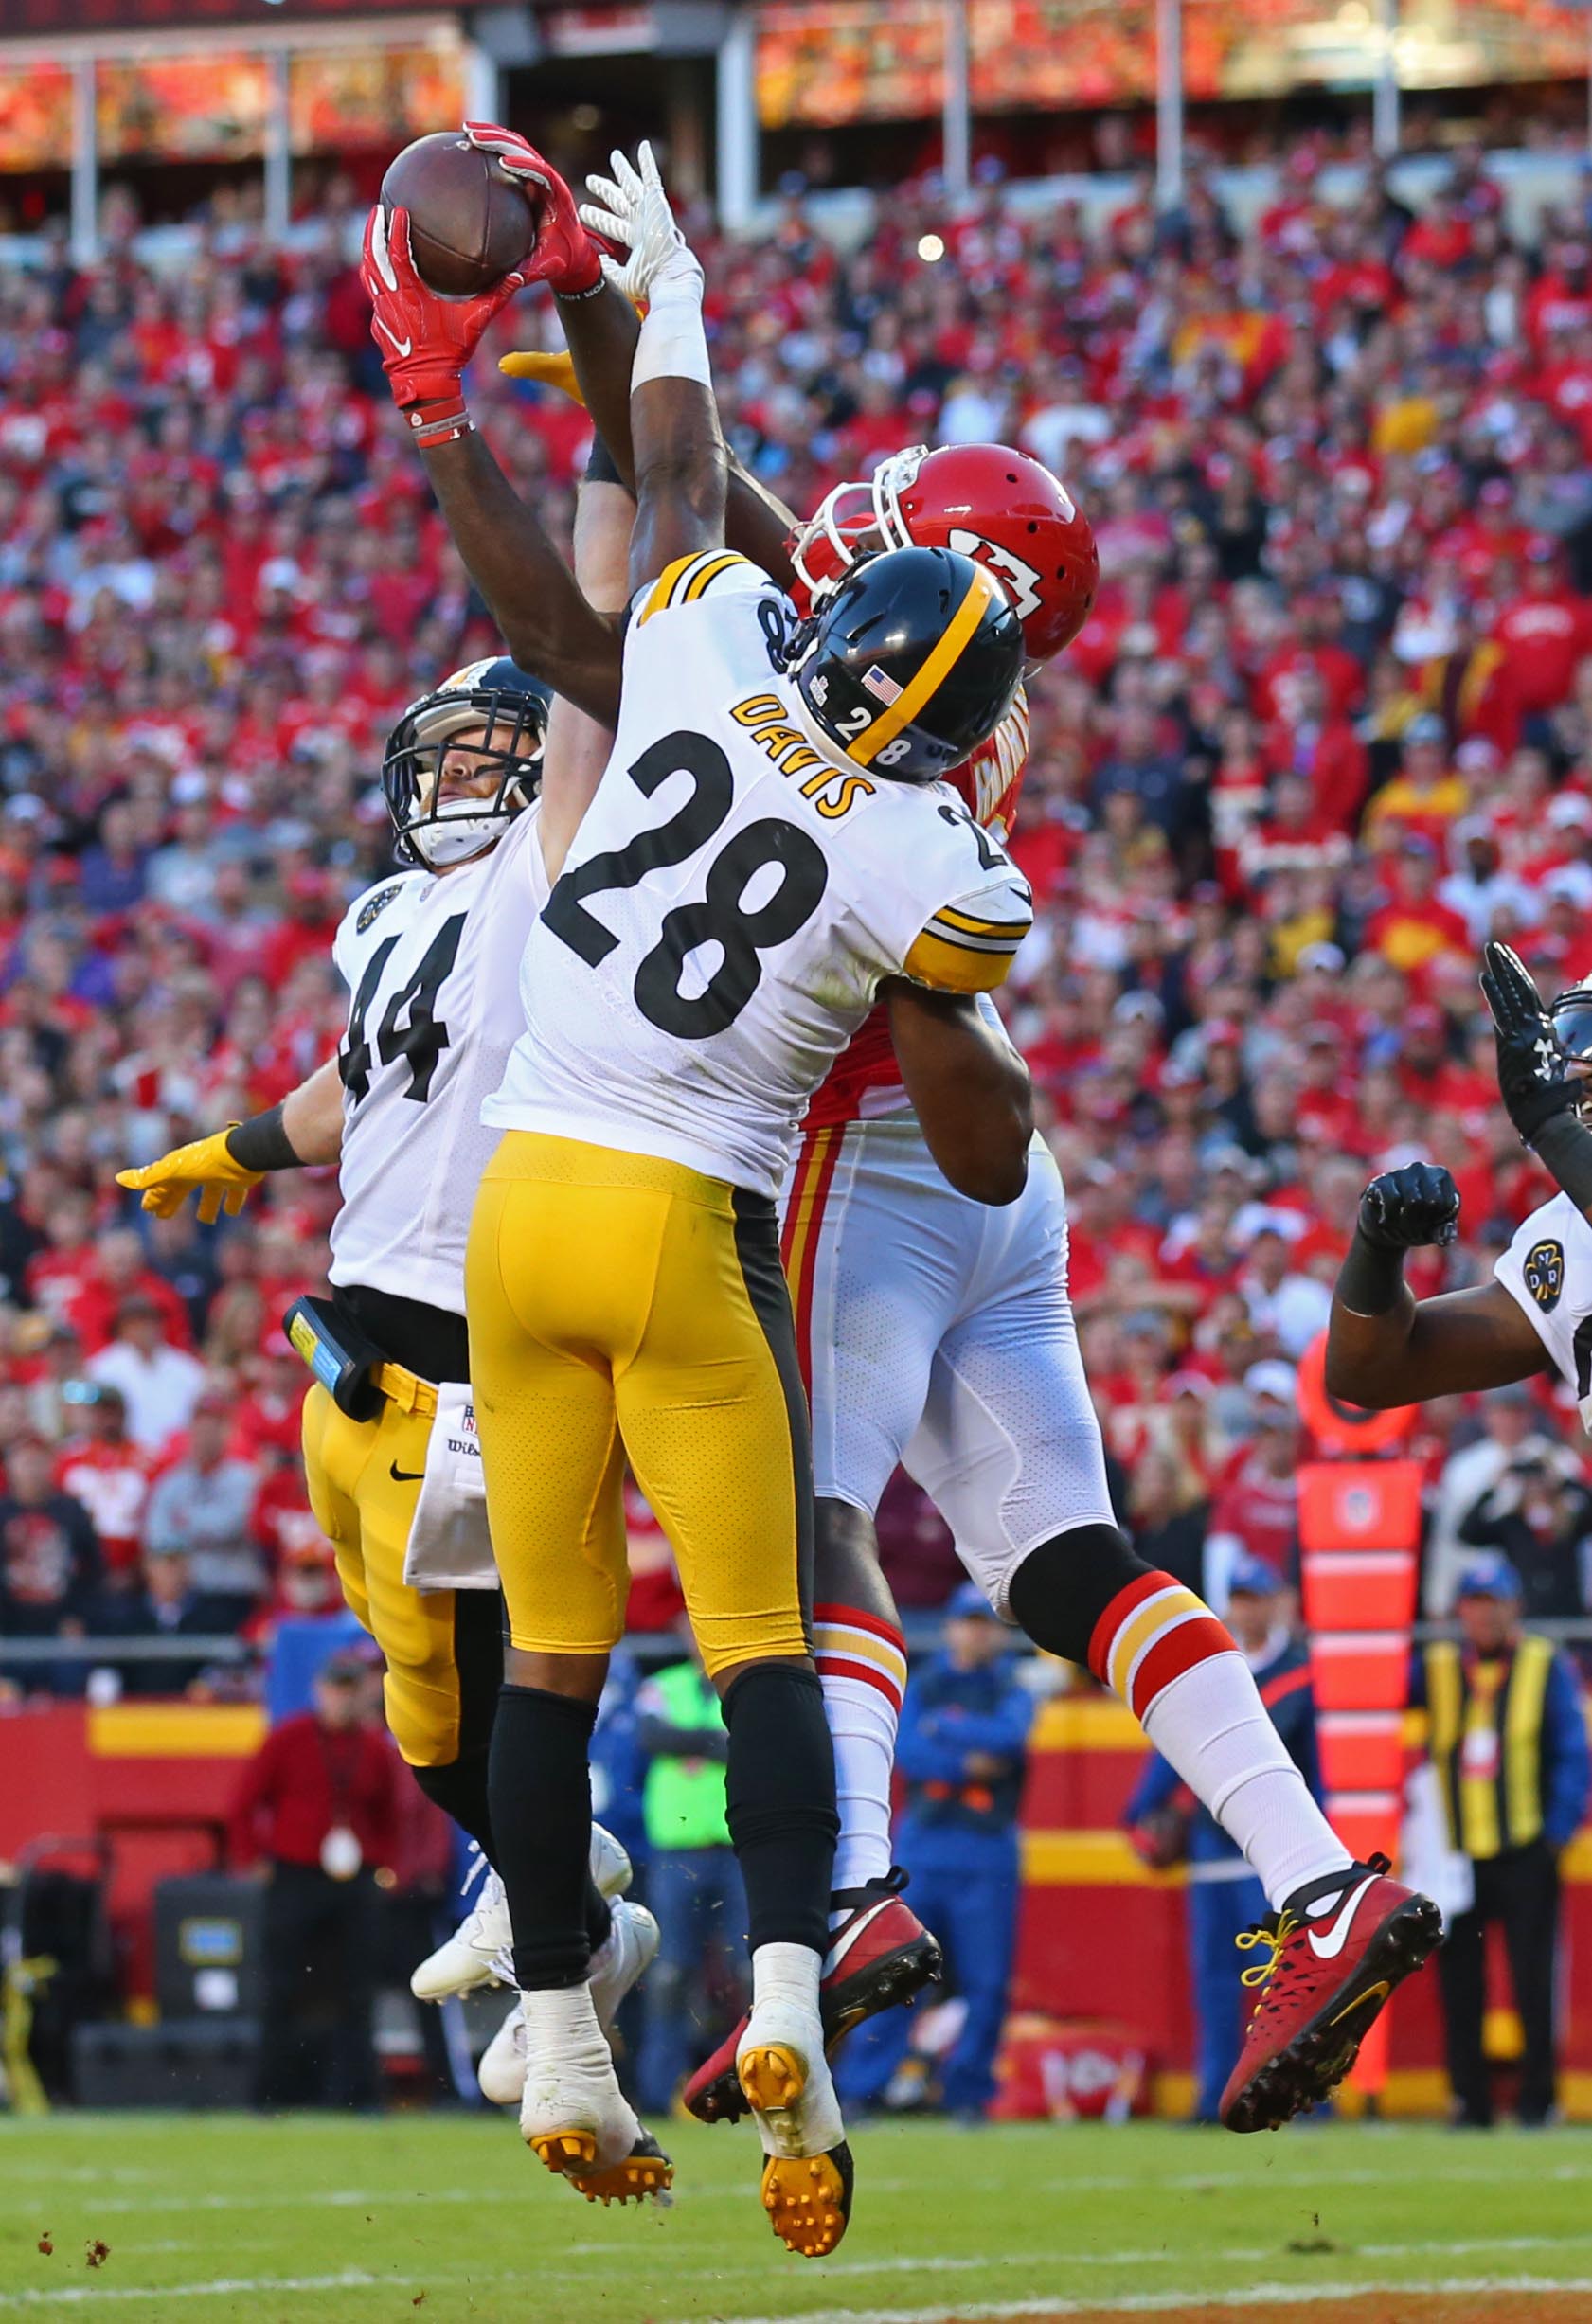 NFL: Pittsburgh Steelers at Kansas City Chiefs